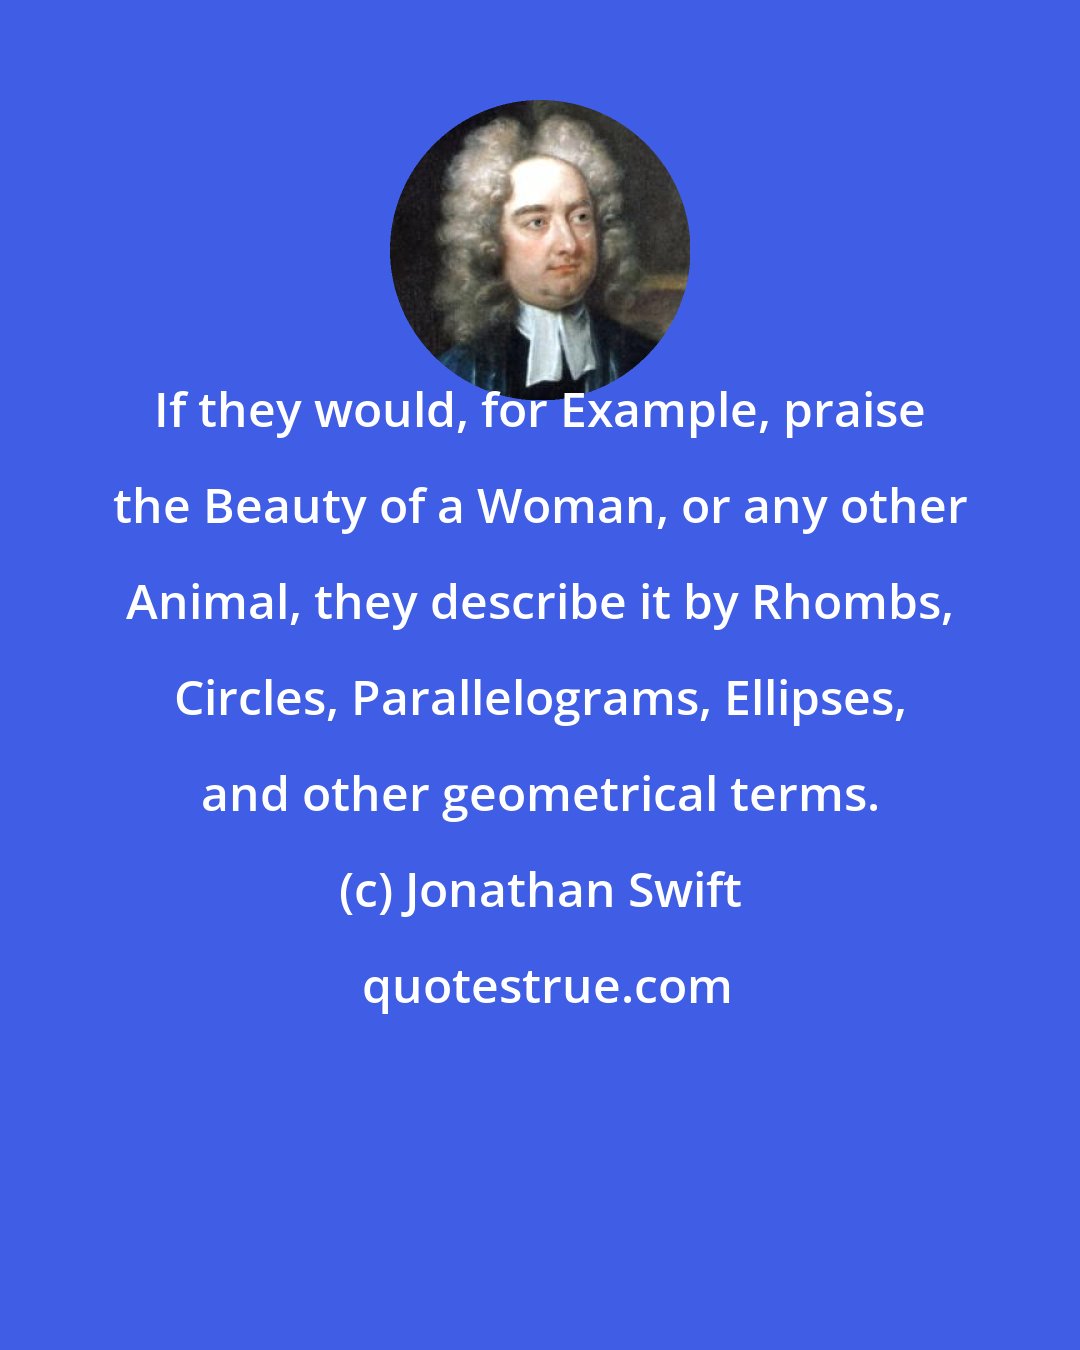 Jonathan Swift: If they would, for Example, praise the Beauty of a Woman, or any other Animal, they describe it by Rhombs, Circles, Parallelograms, Ellipses, and other geometrical terms.